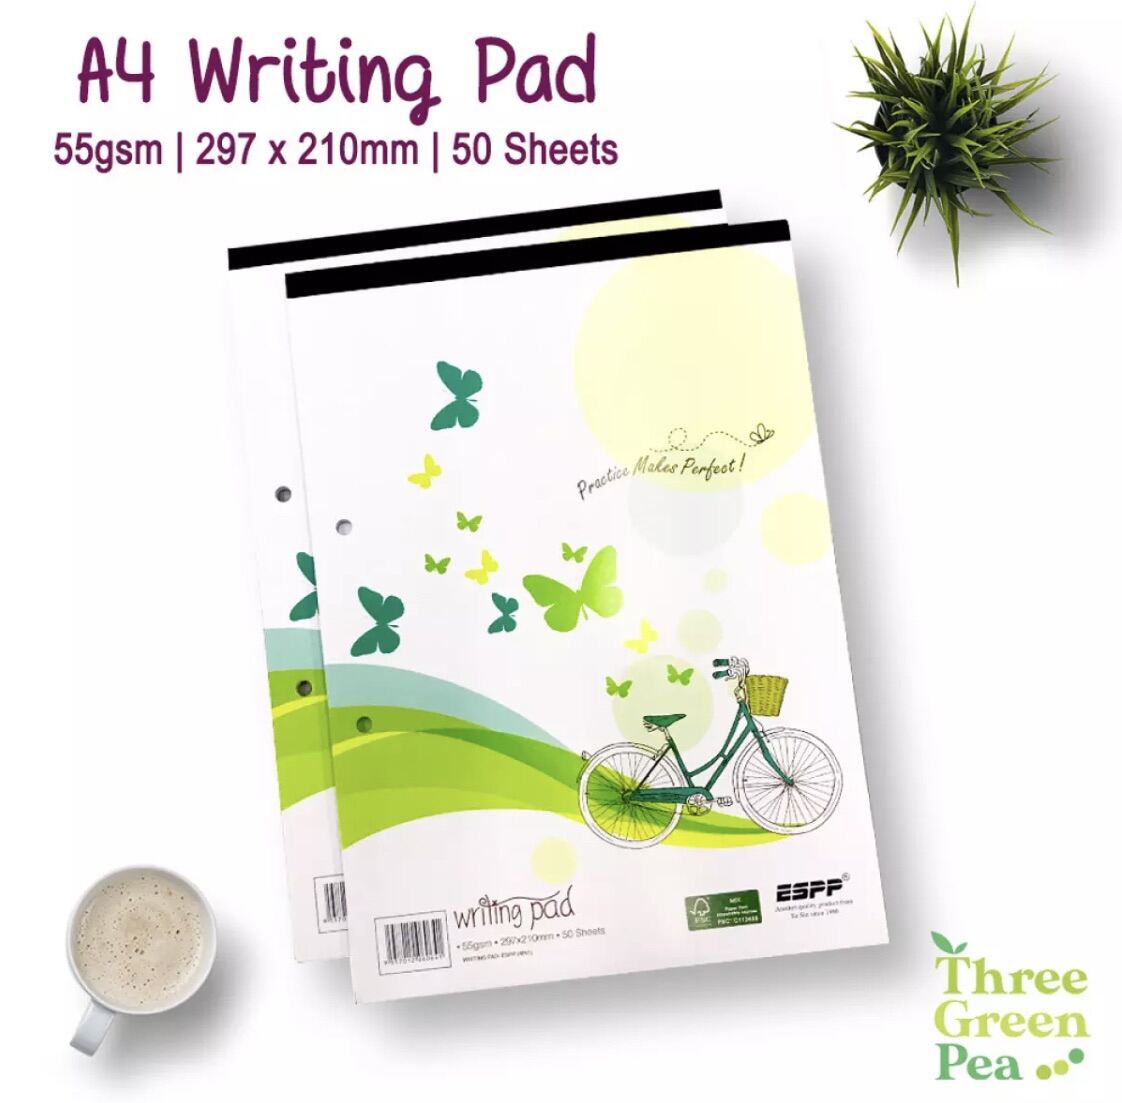 High Quality Writing Pad Paper A4 55gsm - 50 Sheets (Pack of 4)